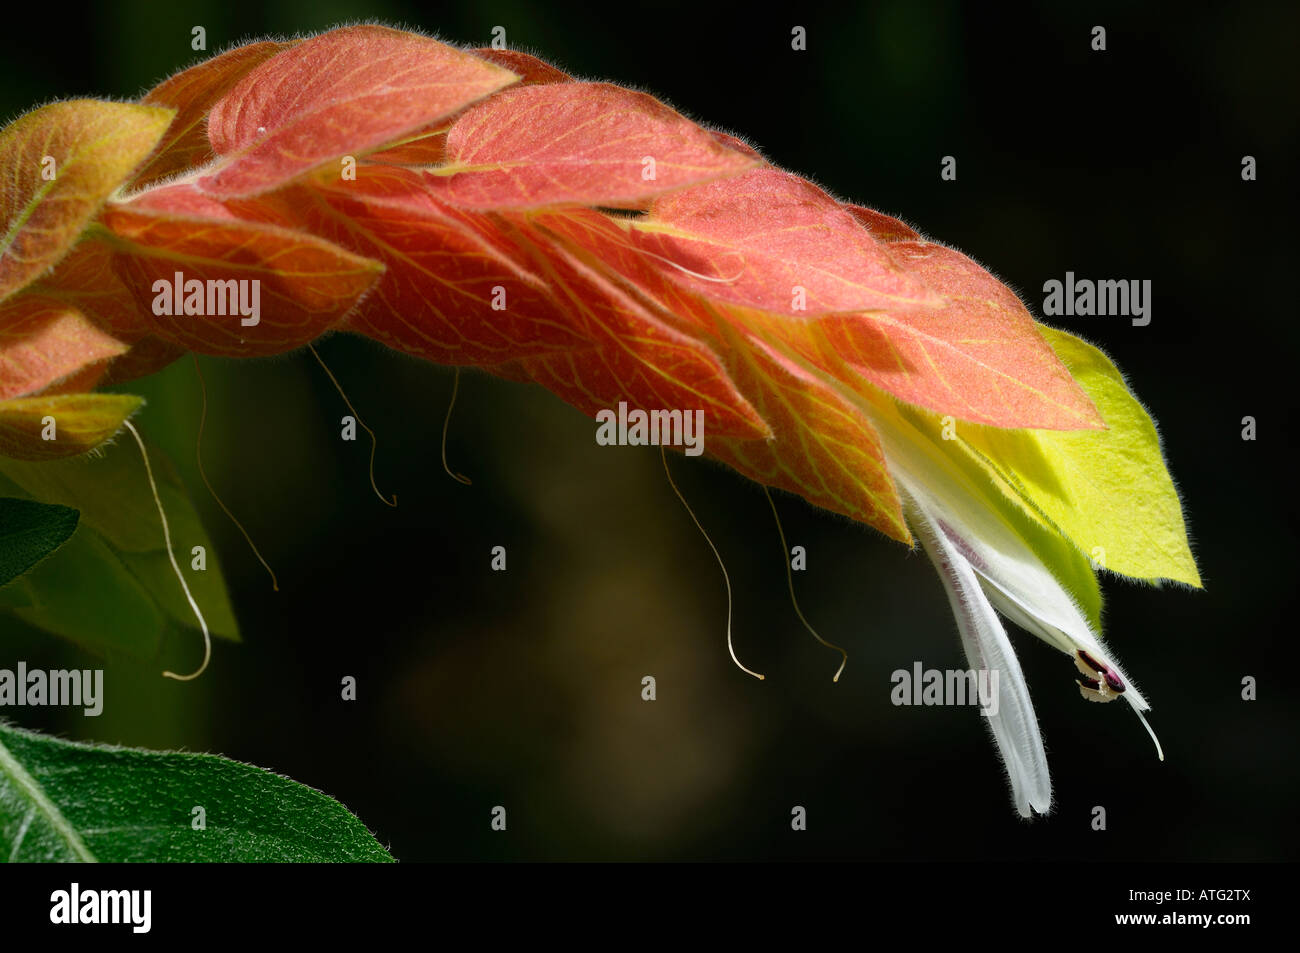 White flowers on a tropical Shrimp Plant with salmon colored bracts Stock Photo